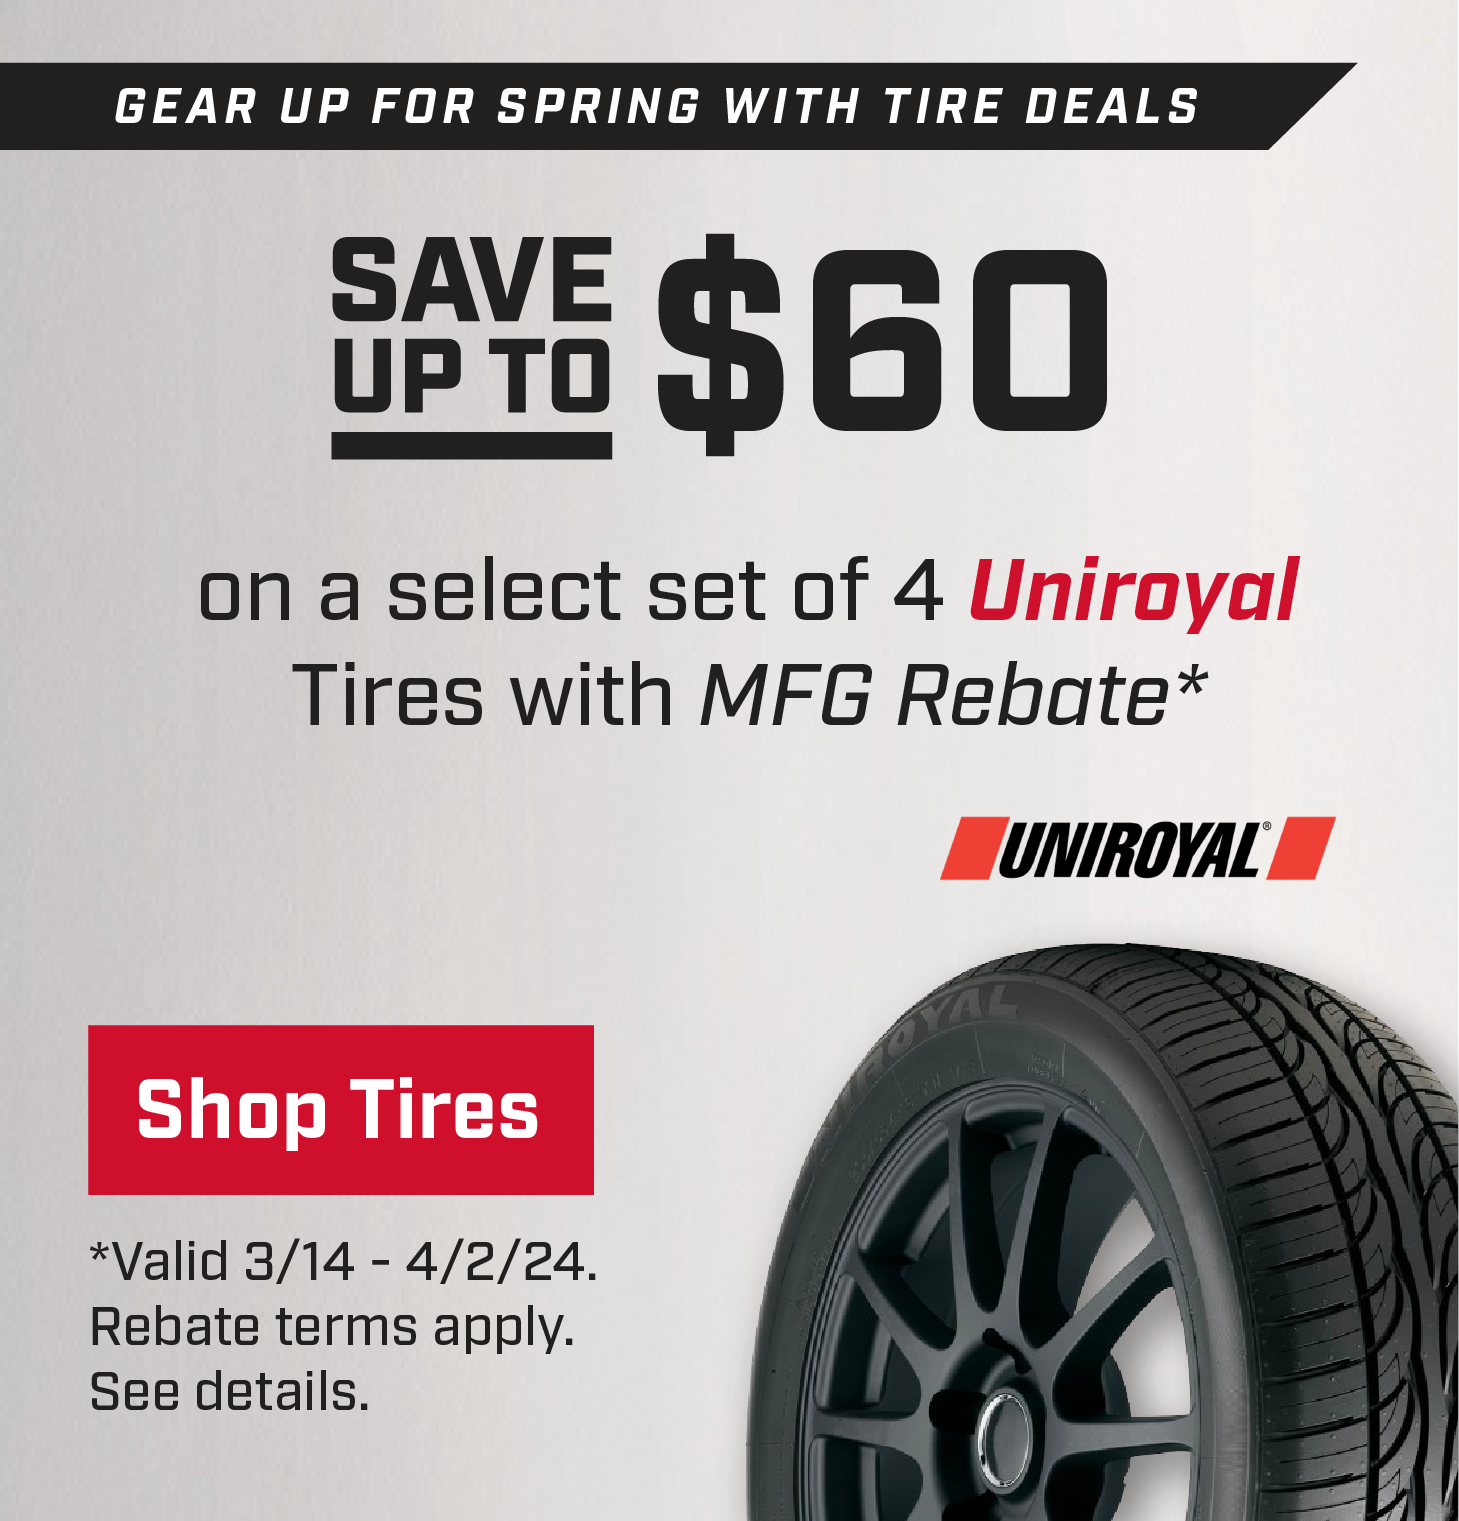 Save on Starfire and Sailun Tires